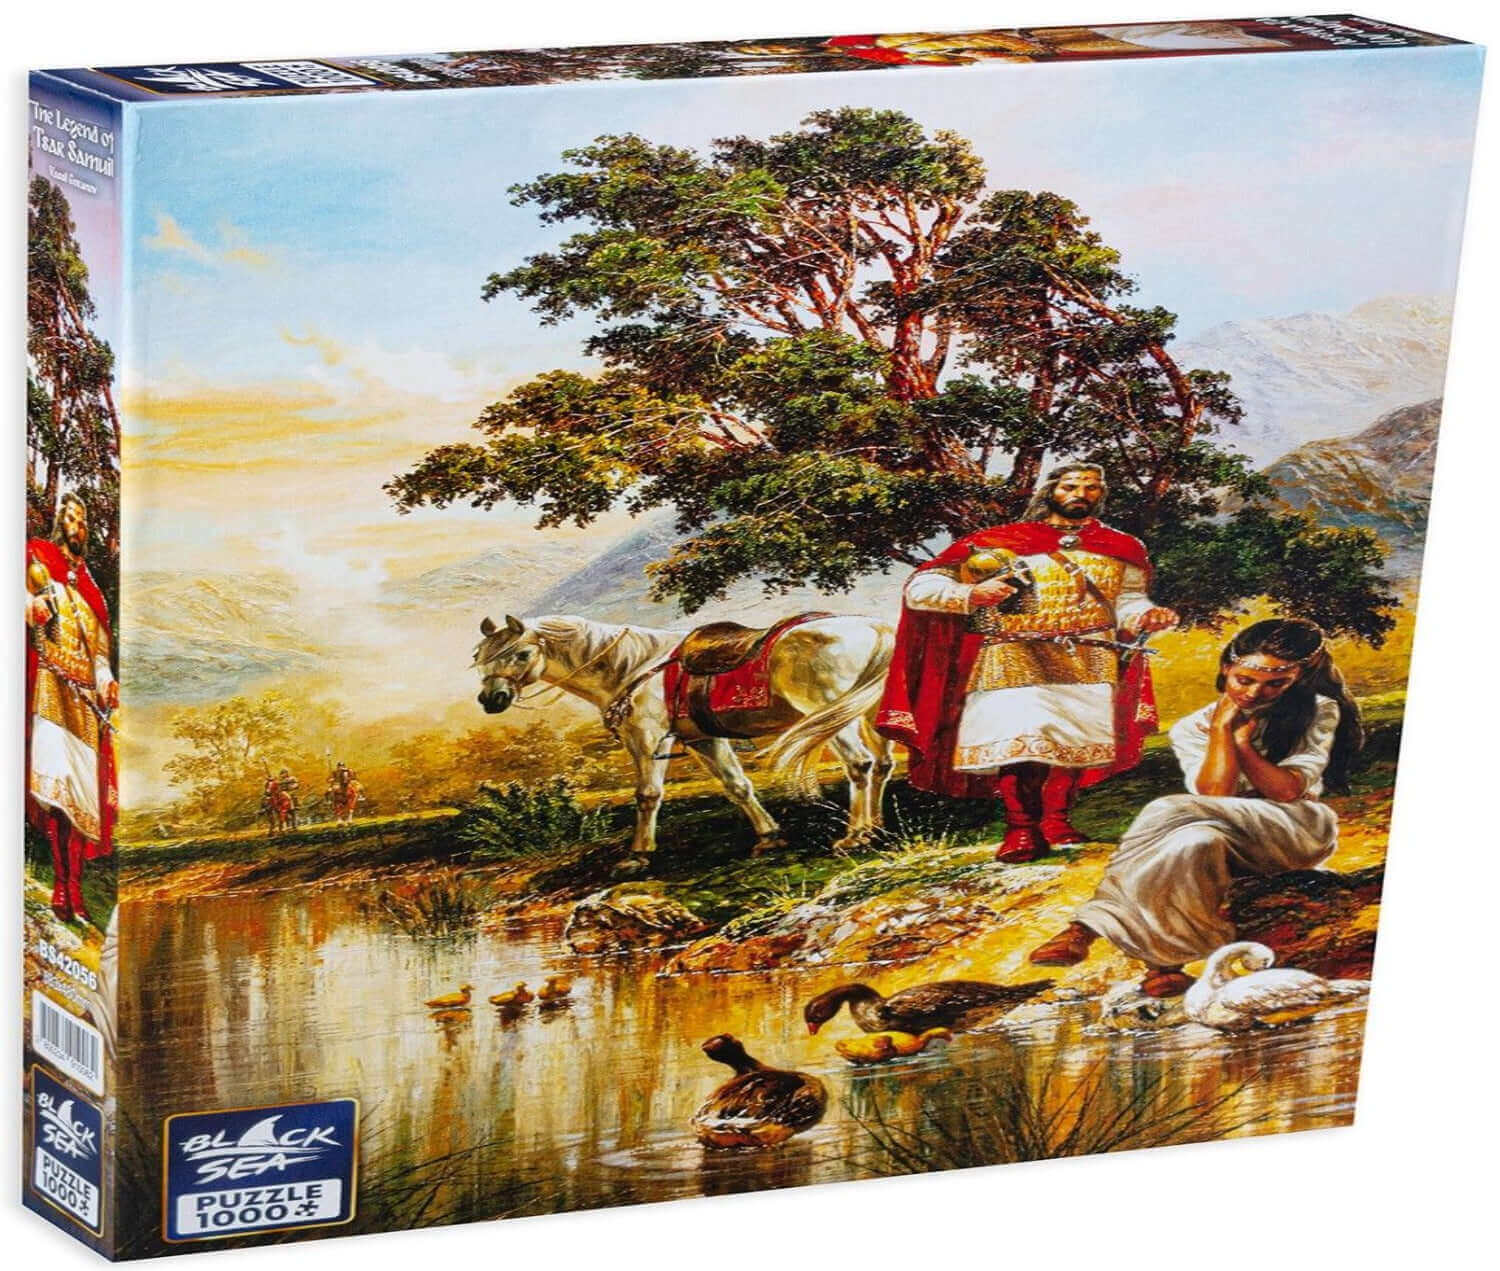 Puzzle Black Sea Premium 1000 pieces - The Legend of Tsar Samuil, Tsar Samuil is among the most famous rulers in Bulgarian history. The chroniclers describe his tragic death as his heart failed at the sight of tens of thousands of his soldiers that were b